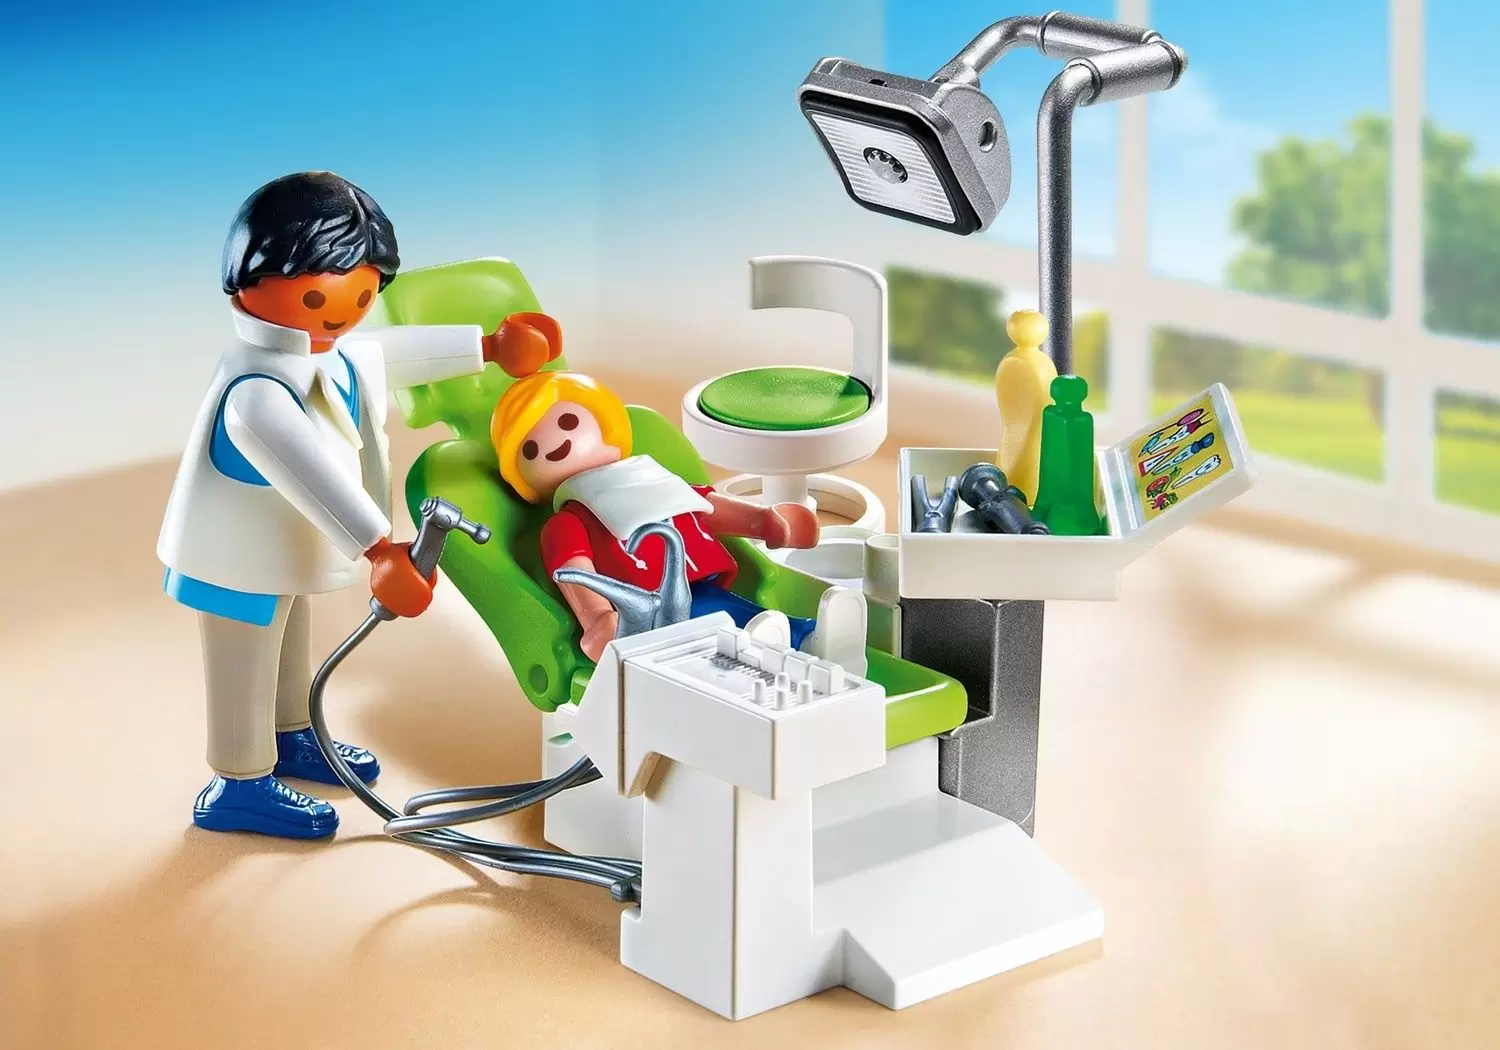 Playmobil in the City - Dentist with Patient